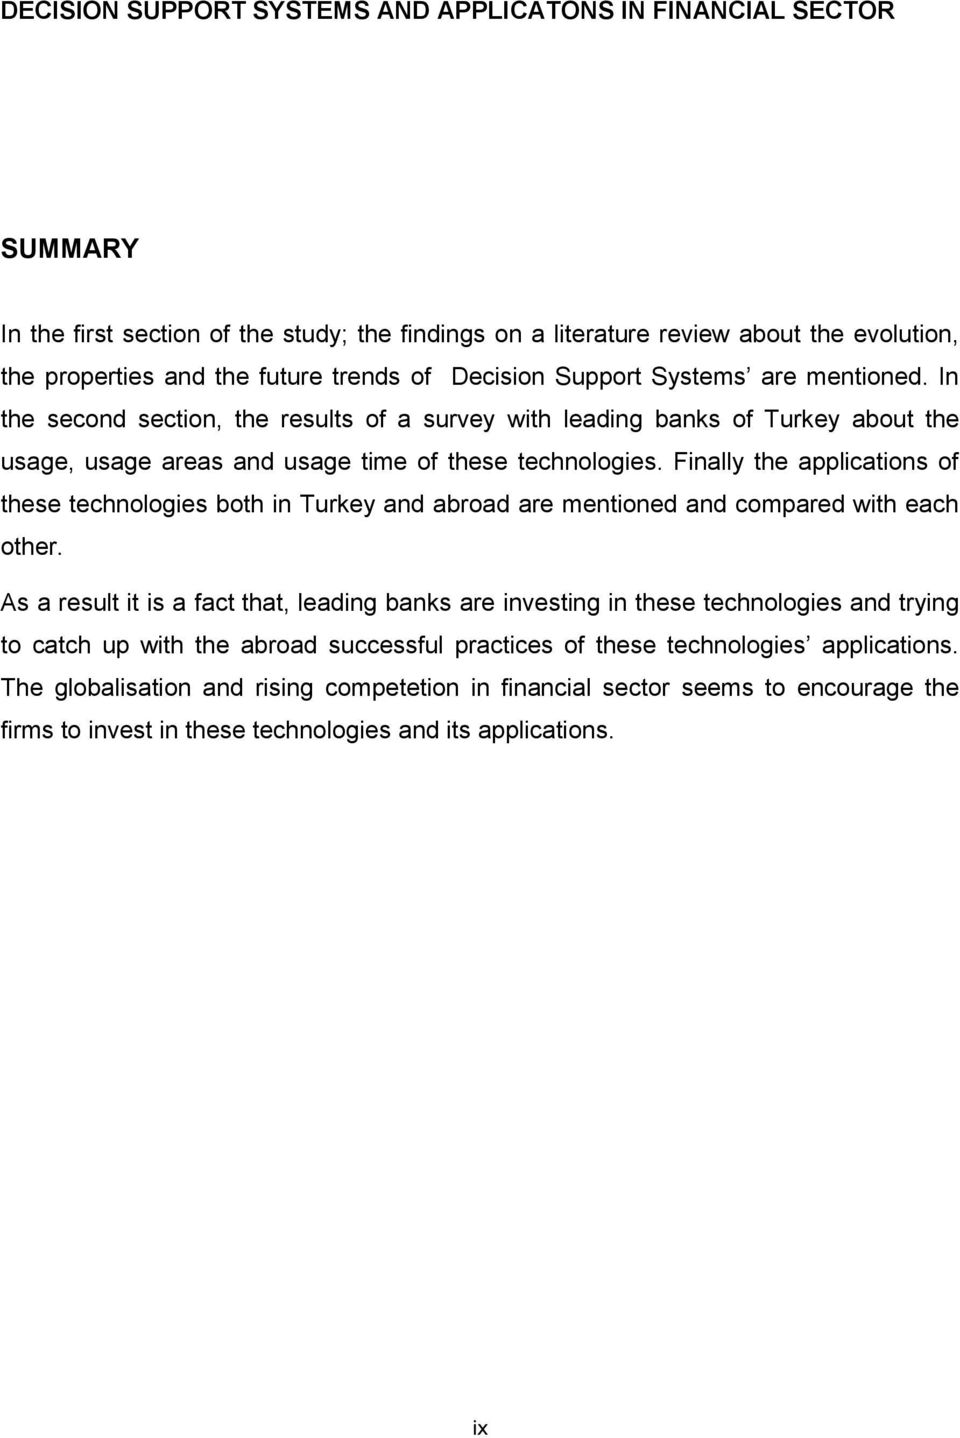 Finally the applications of these technologies both in Turkey and abroad are mentioned and compared with each other.